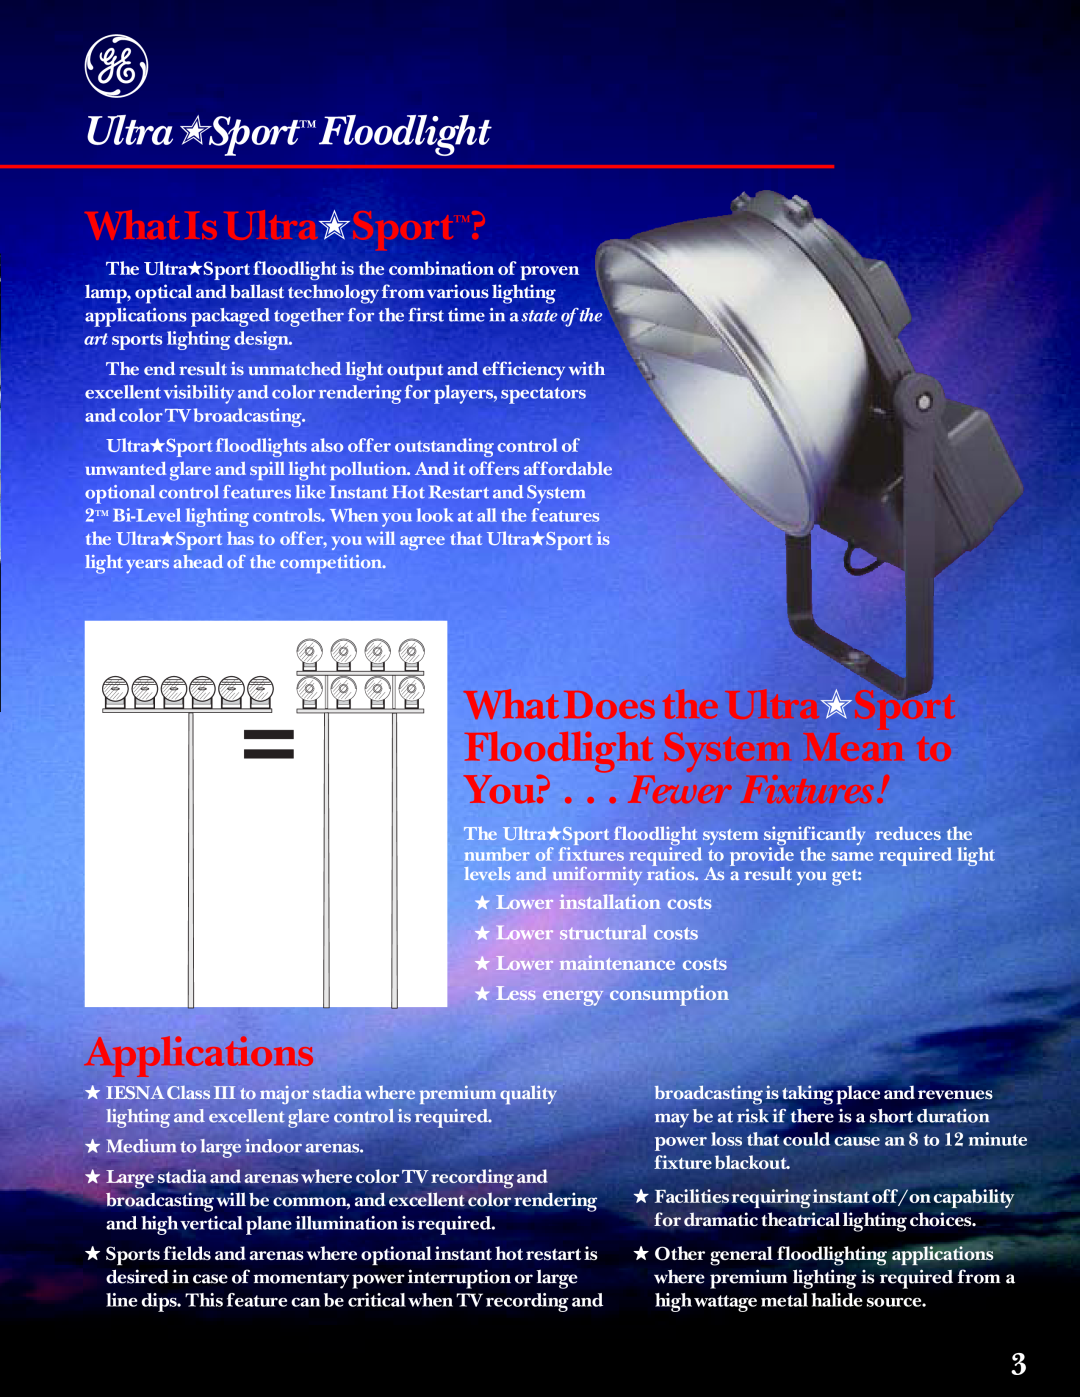 GE UltraSportTM Floodlight, What Is UltraSportTM?, What Does the UltraSport, Floodlight System Mean to, Applications 